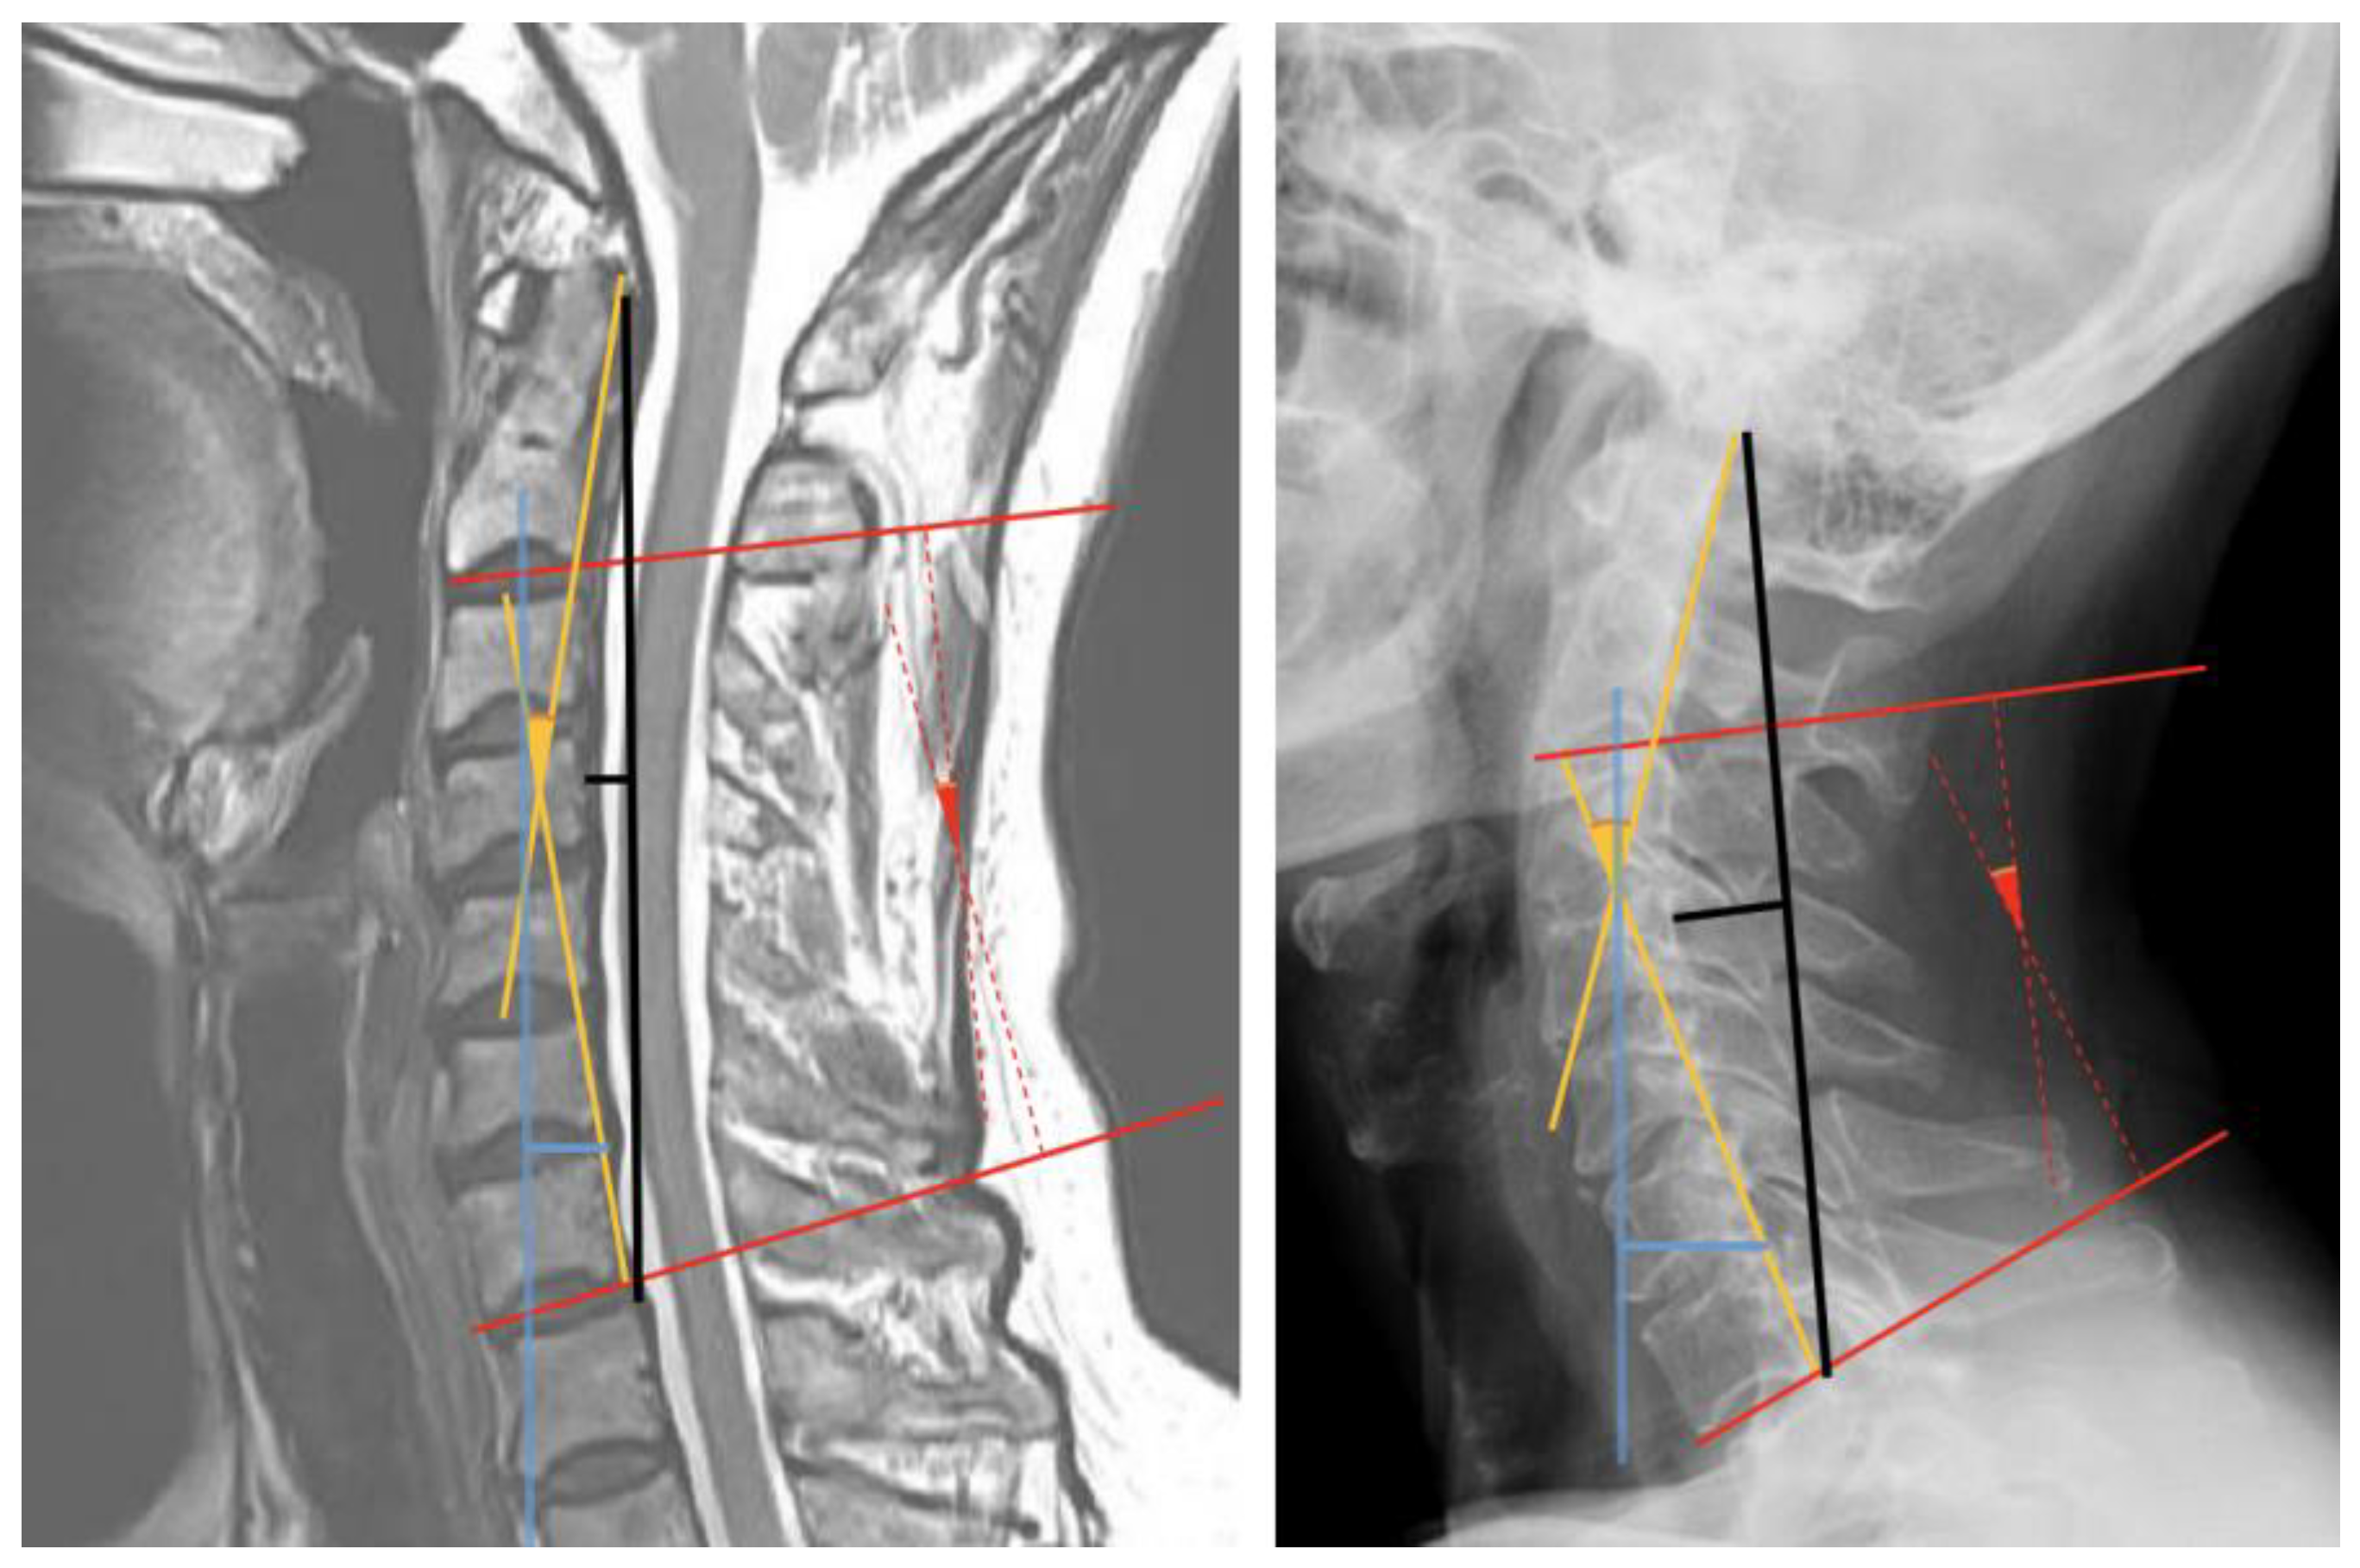 IJERPH | Free Full-Text | Diagnostic Accuracy of Magnetic Resonance Imaging  for Sagittal Cervical Spine Alignment: A Retrospective Cohort Study